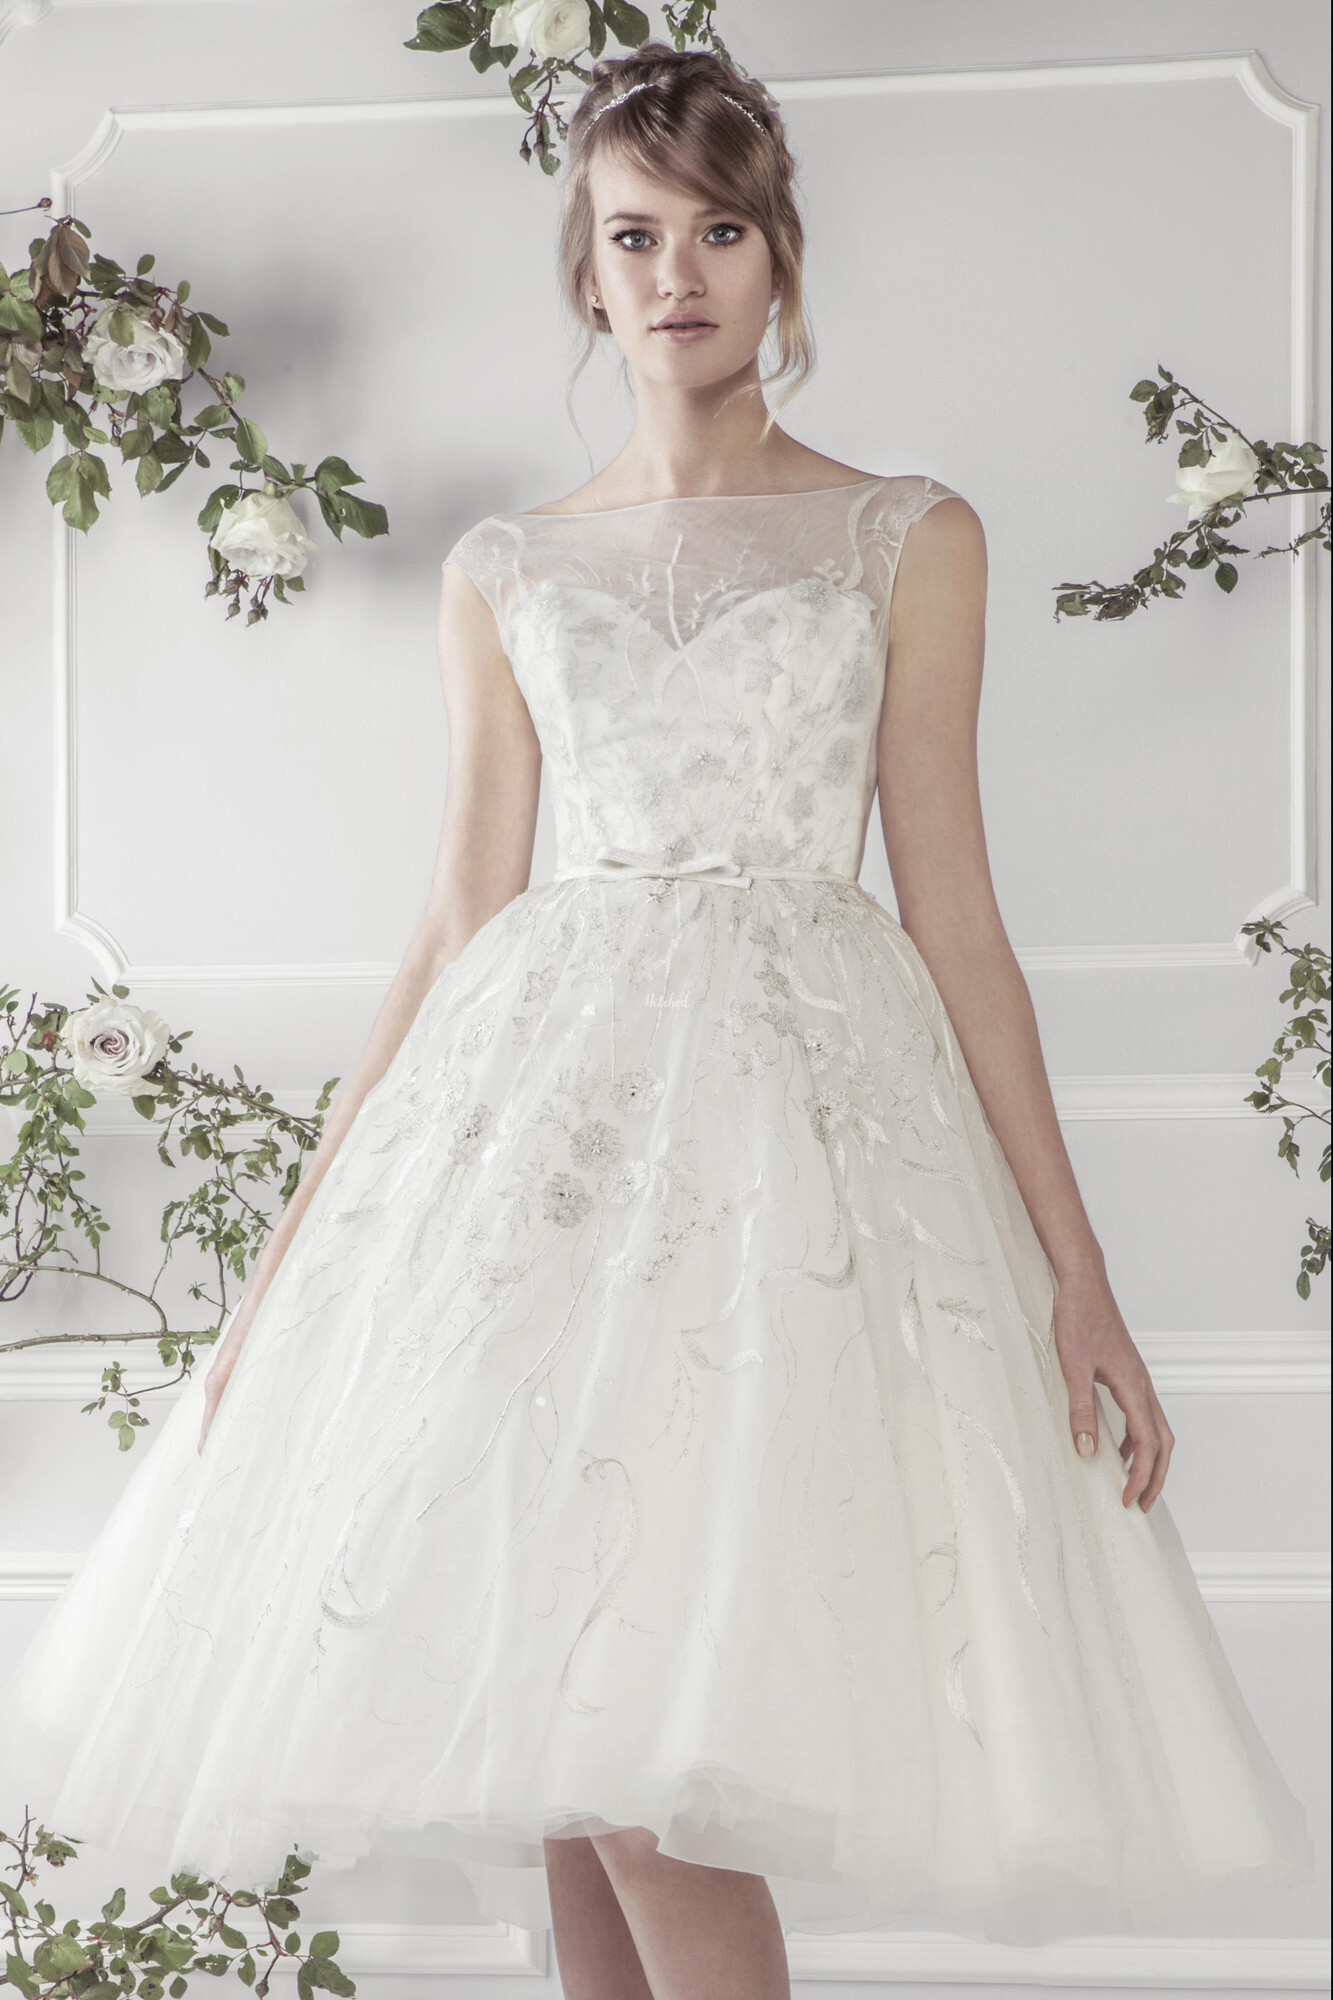 11411 Wedding Dress from Ellis Bridals - hitched.co.uk